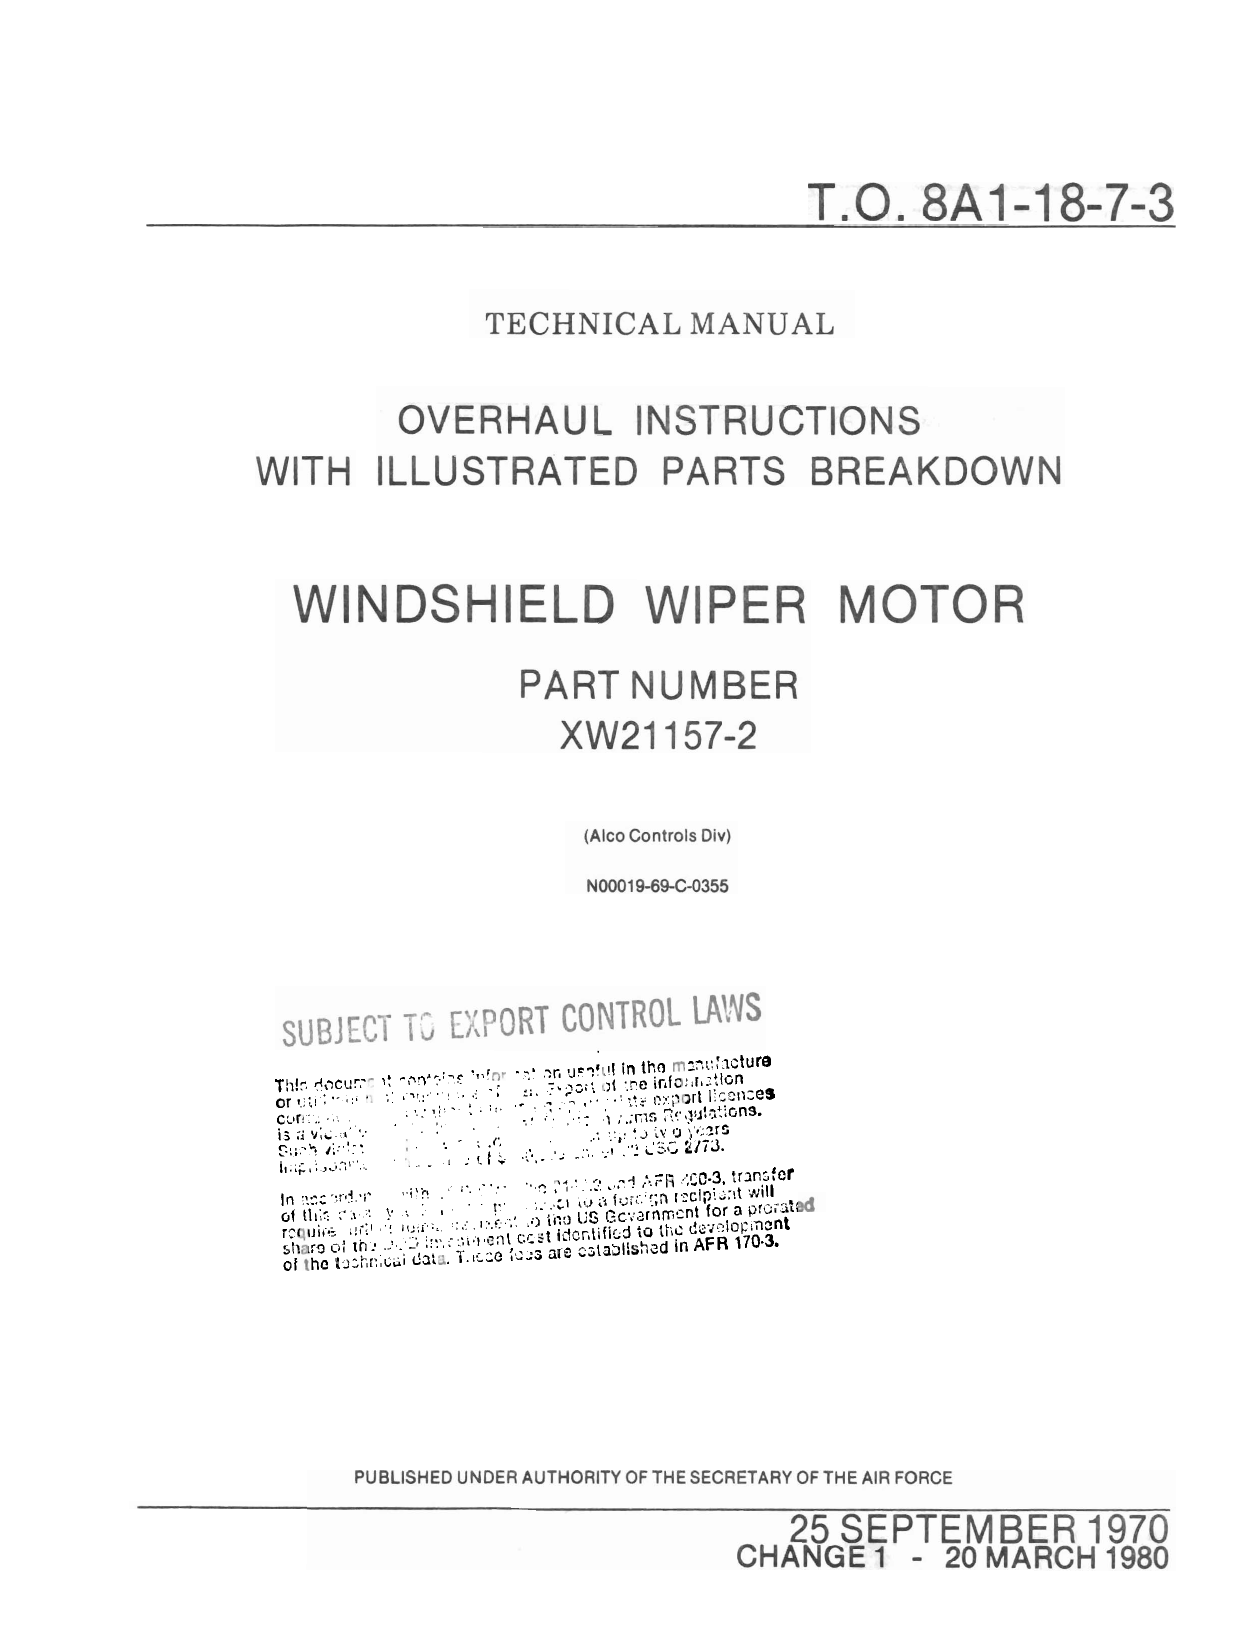 Sample page 1 from AirCorps Library document: Overhaul Instructions with Illustrated Parts Breakdown for Windshield Wiper Motor - Parts XW21157-2 